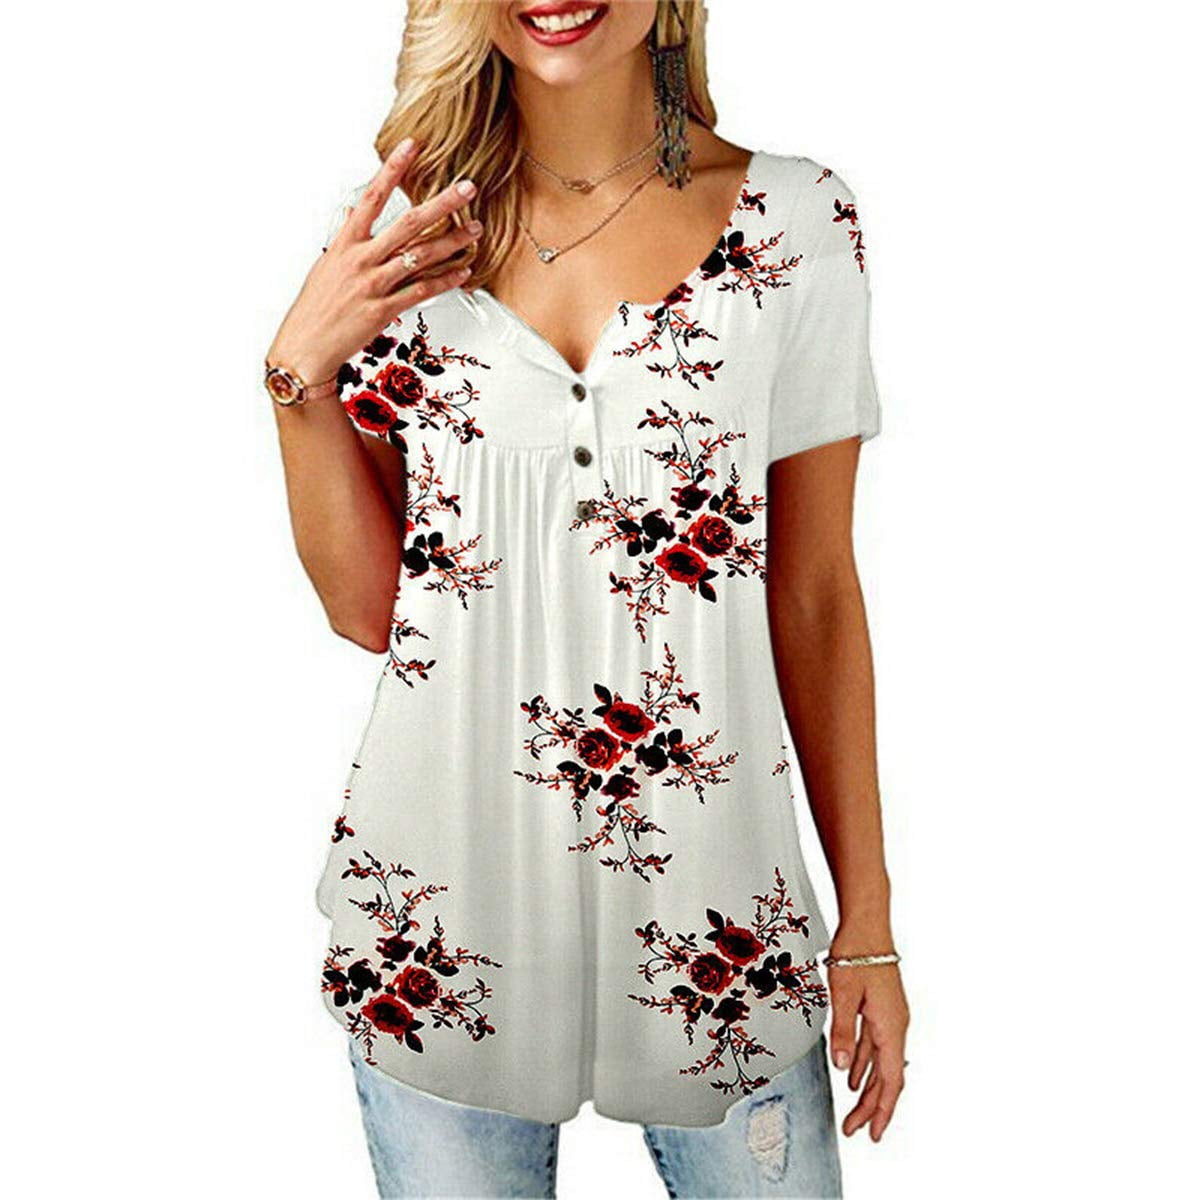 Short Sleeve Tee Blouse for Women,Yamally Womens Button-Down T Shirts V-Neck Floral Print Loose Casual Tops S-5XL 